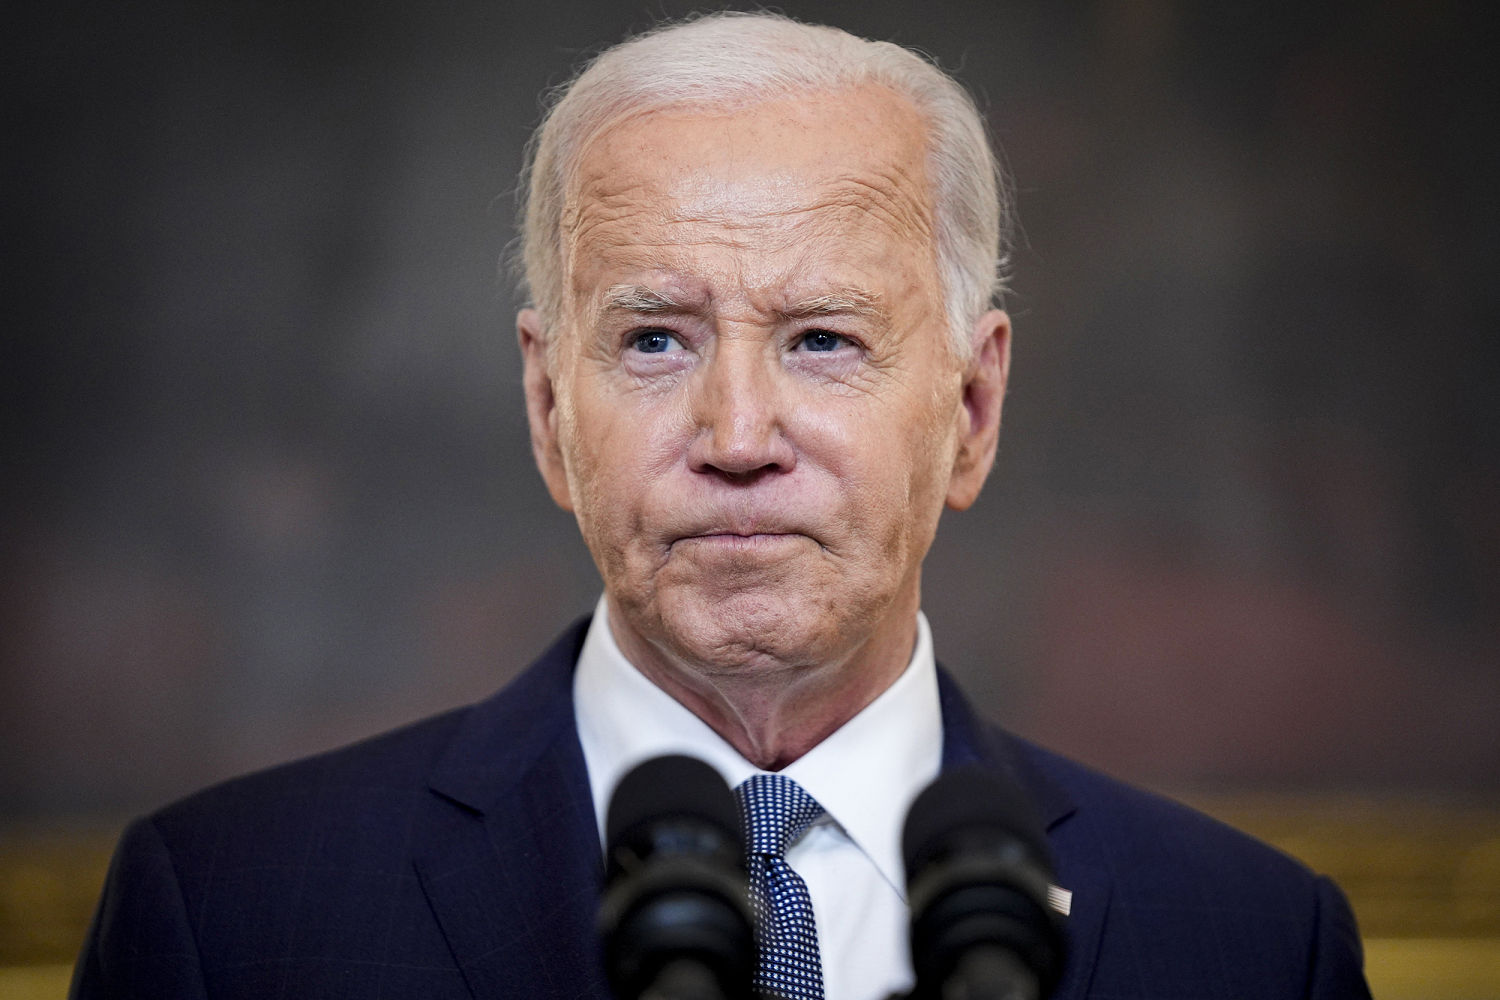 Biden left feeling angry and betrayed by top Democratic leaders wavering on his campaign